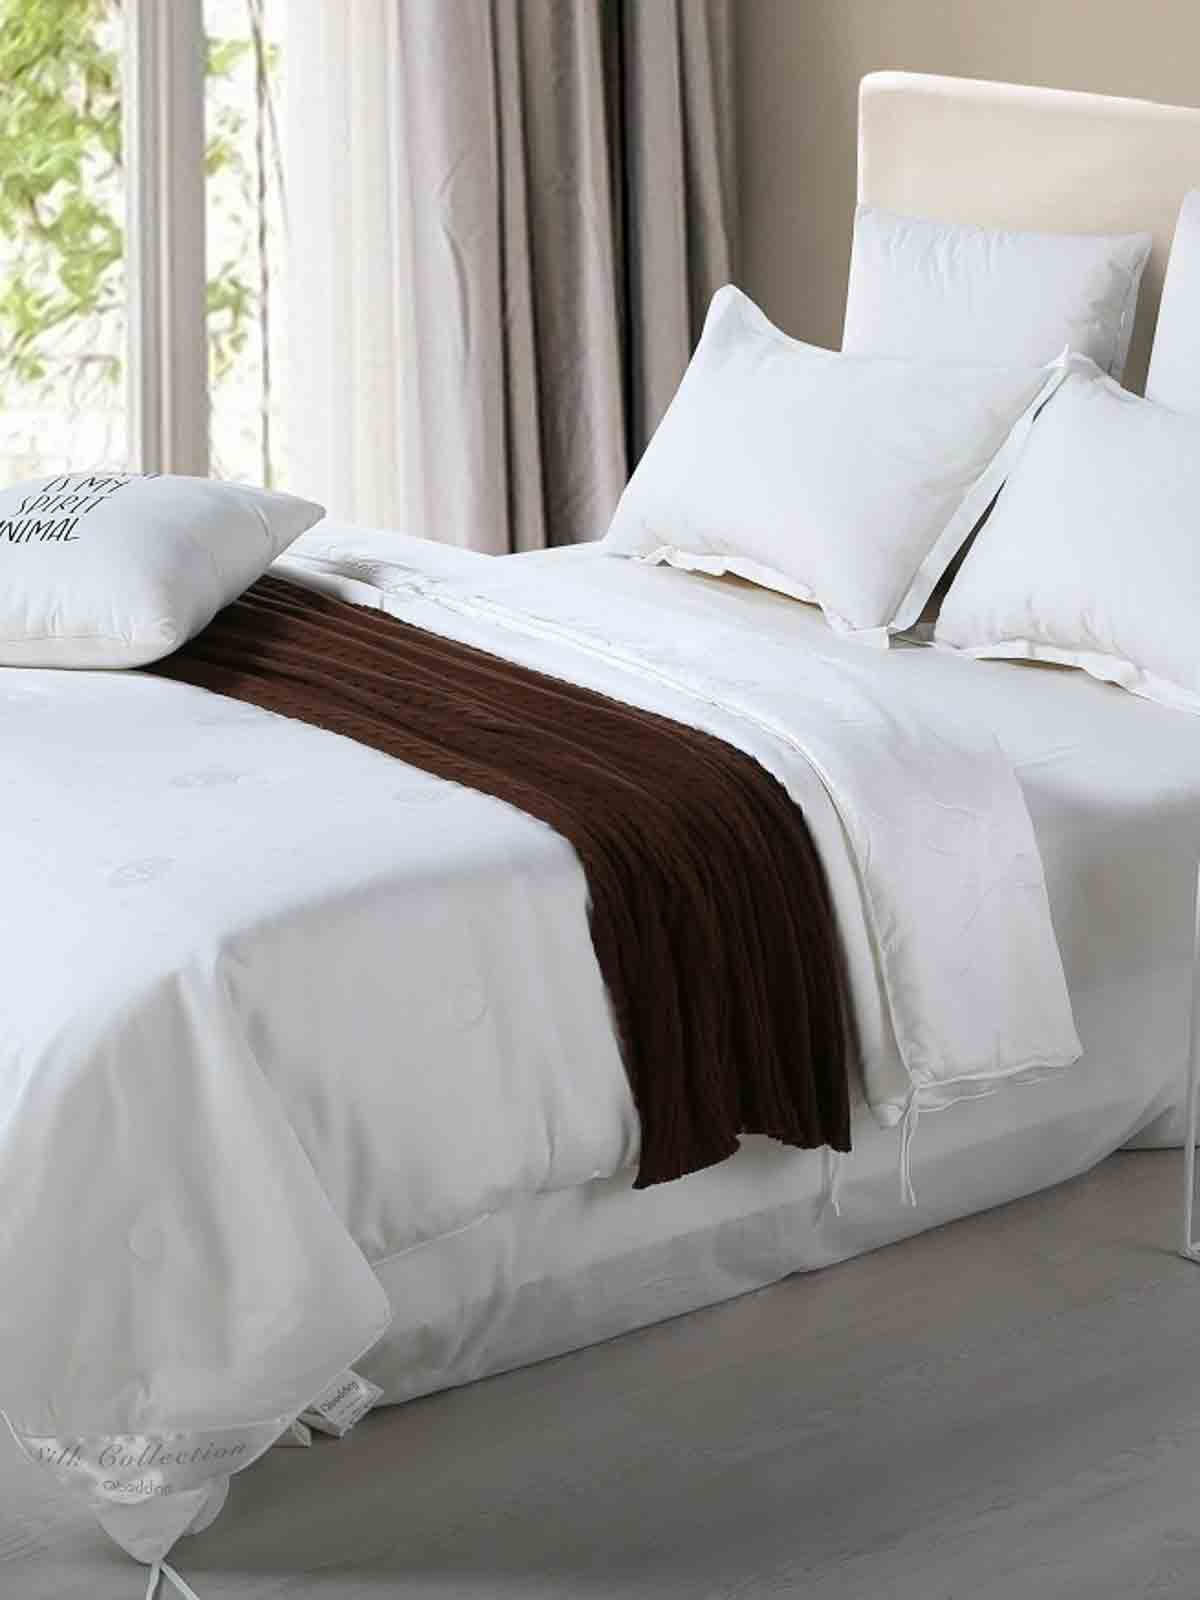  Cuddl Duds Sheet Sets Mulberry Silk Bed-Sheets 4-Piece